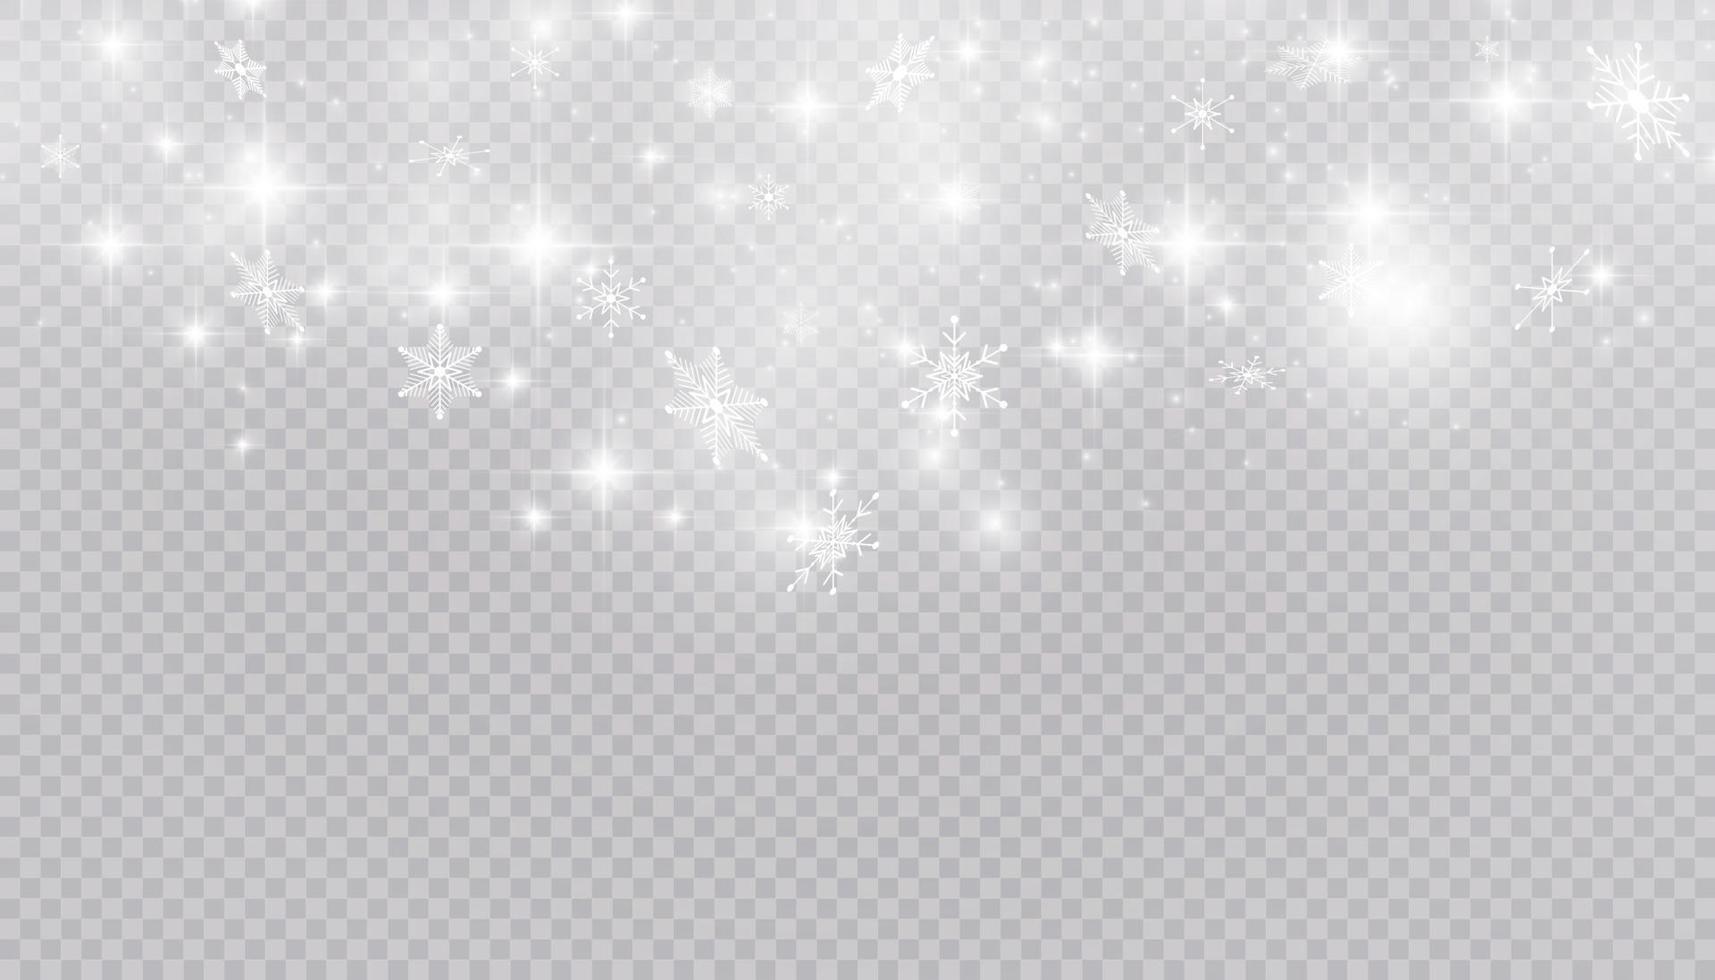 White snow flies on a background. Christmas snowflakes. Winter blizzard background illustration. vector